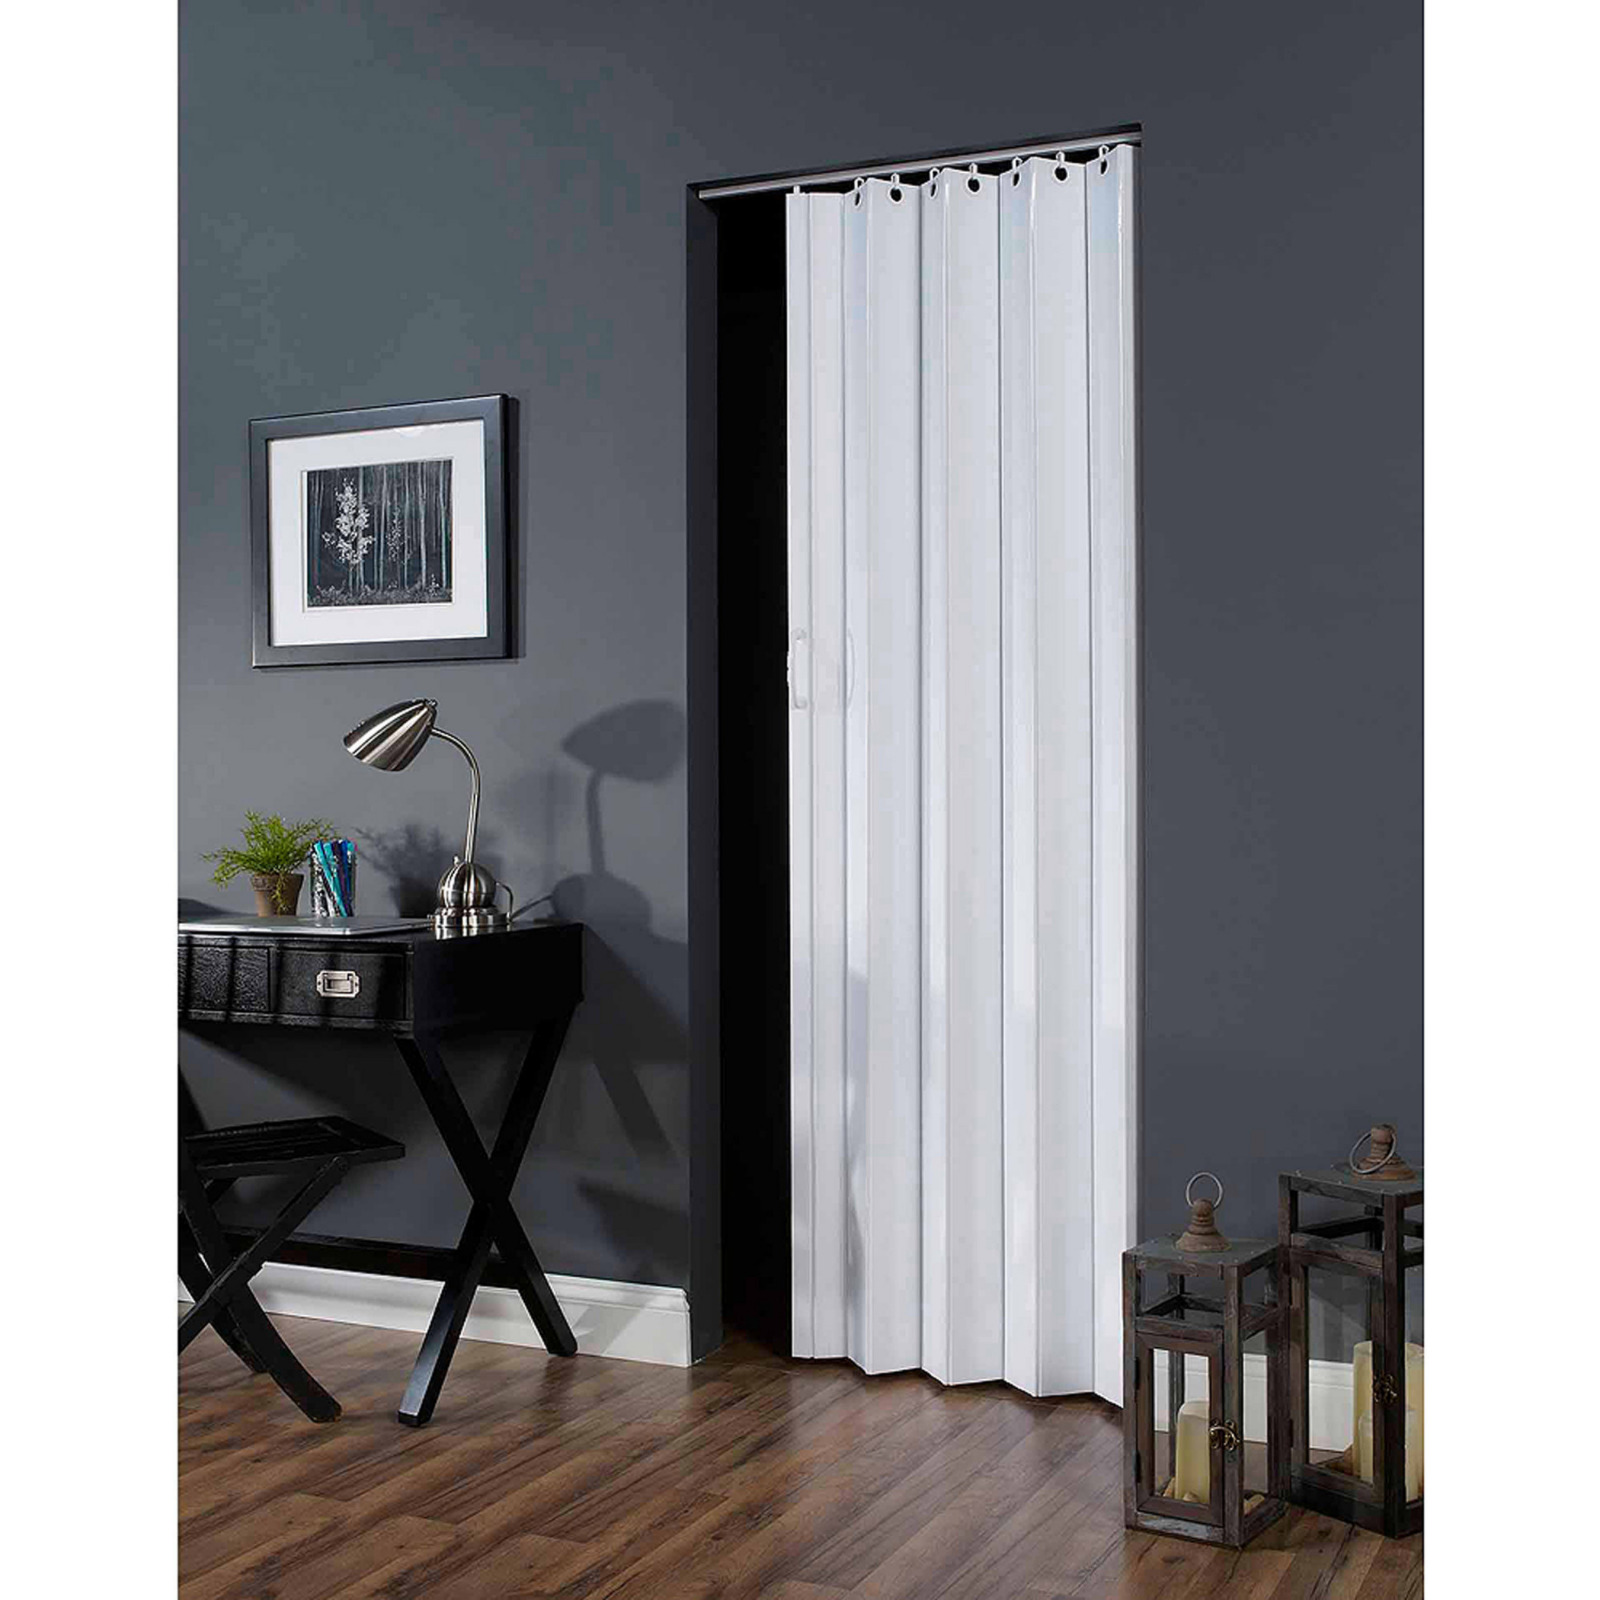 Folding Door Accordion Sliding Room Privacy Divider Closet 36 in X 80 in White